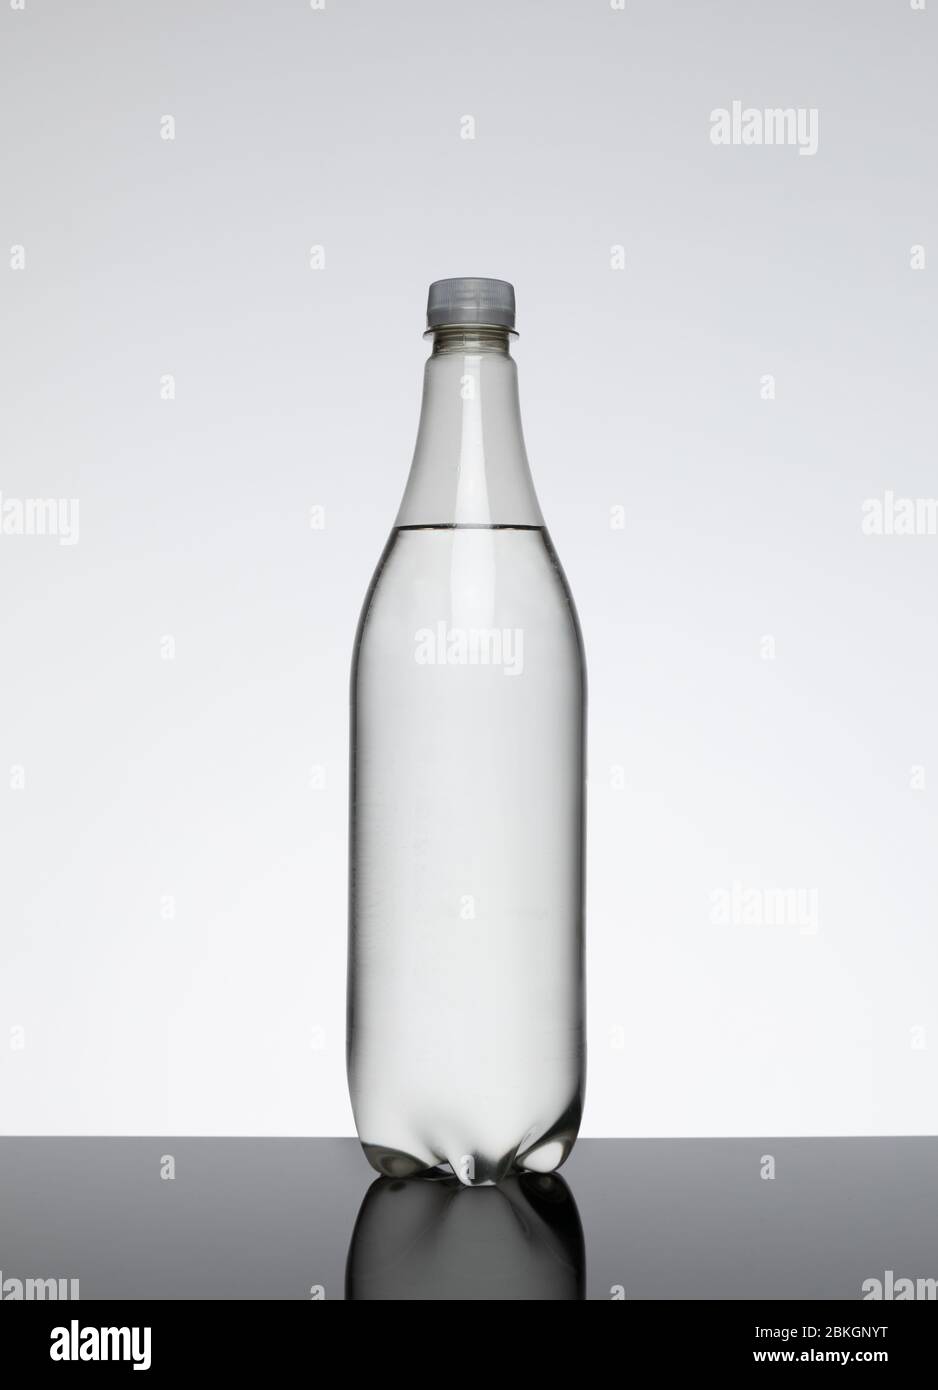 Single 1 litre clear plastic bottle with no label containing a clear liquid against a plain background Stock Photo